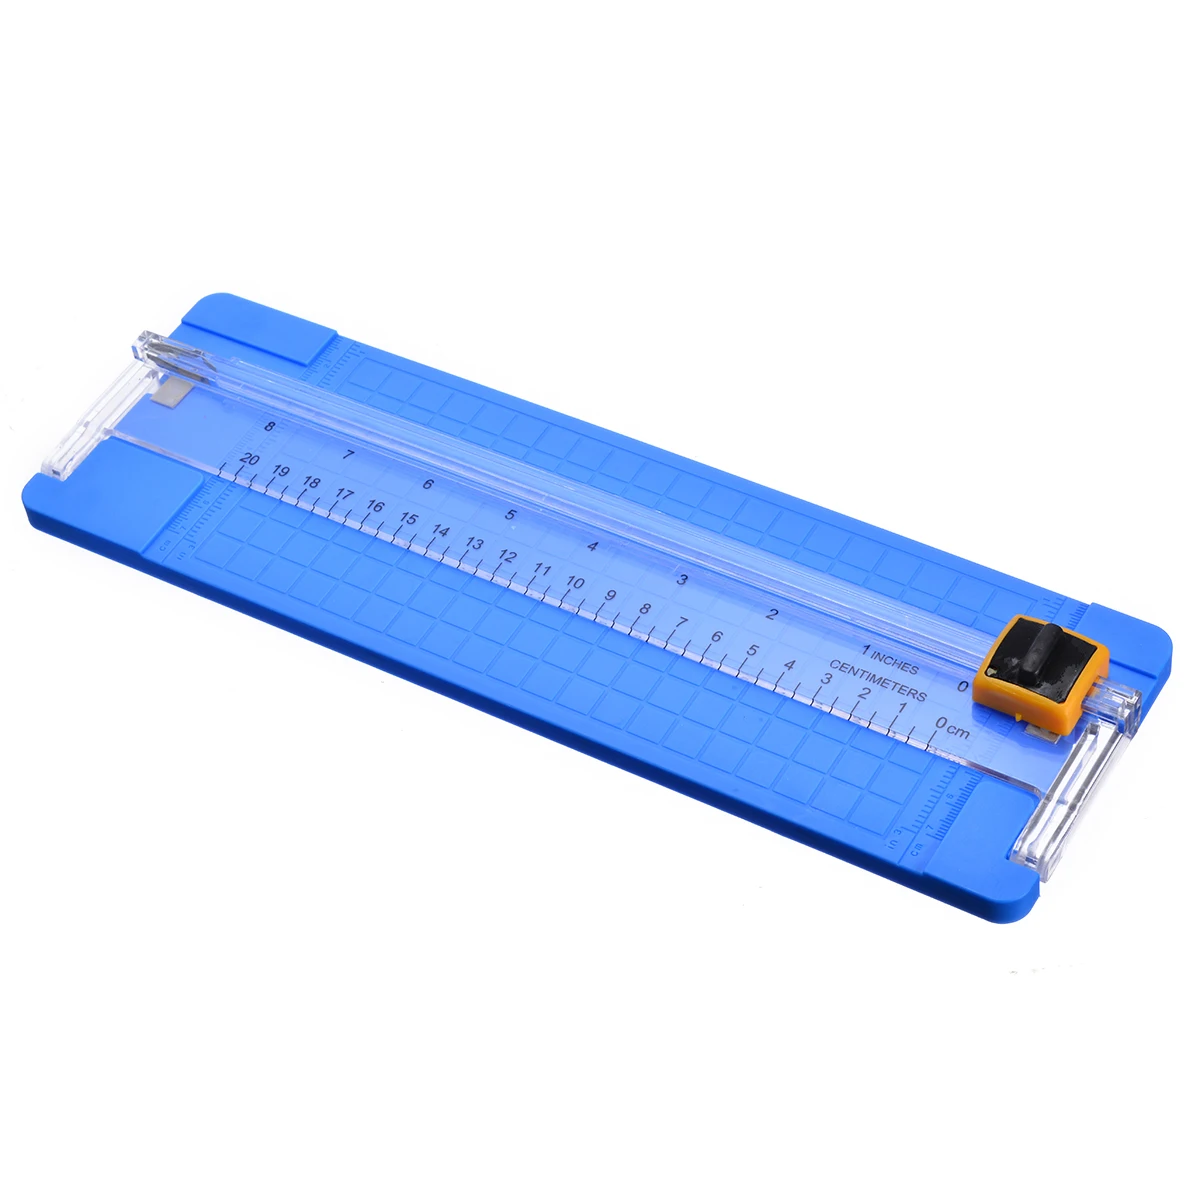 

A4 Precision Rotary Guillotine Single Blade Removal Cutting Blade Trimmer Cutter Ruler Craft Tool for Paper Photo Postage Labels